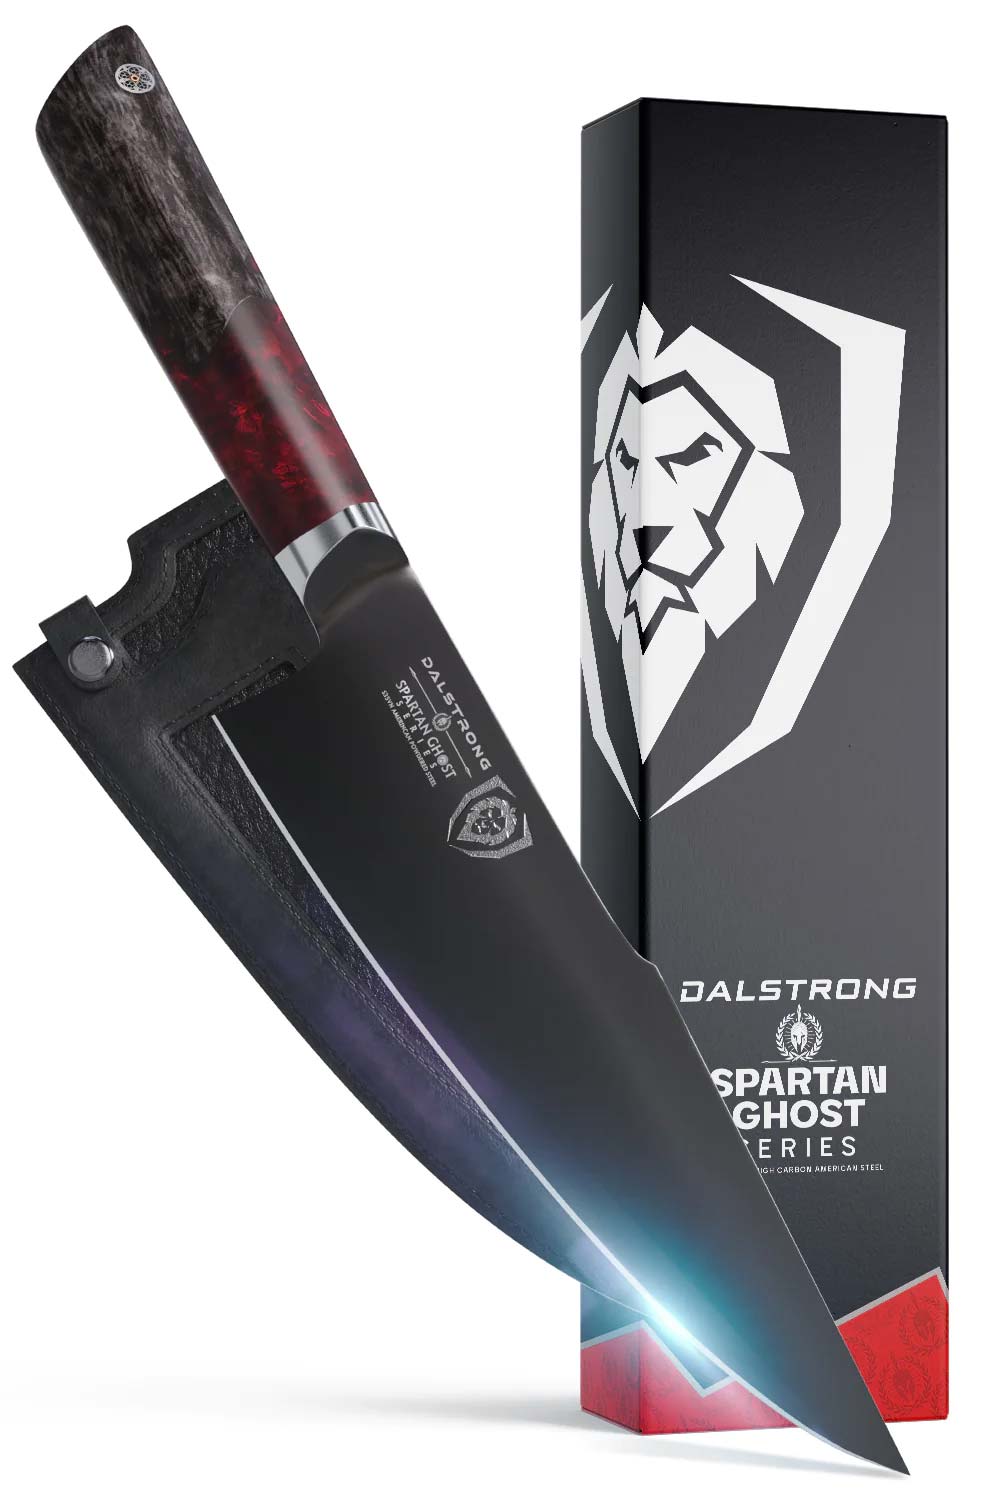 Dalstrong spartan ghost series 8 inch chef knife in front of it's premium packaging.